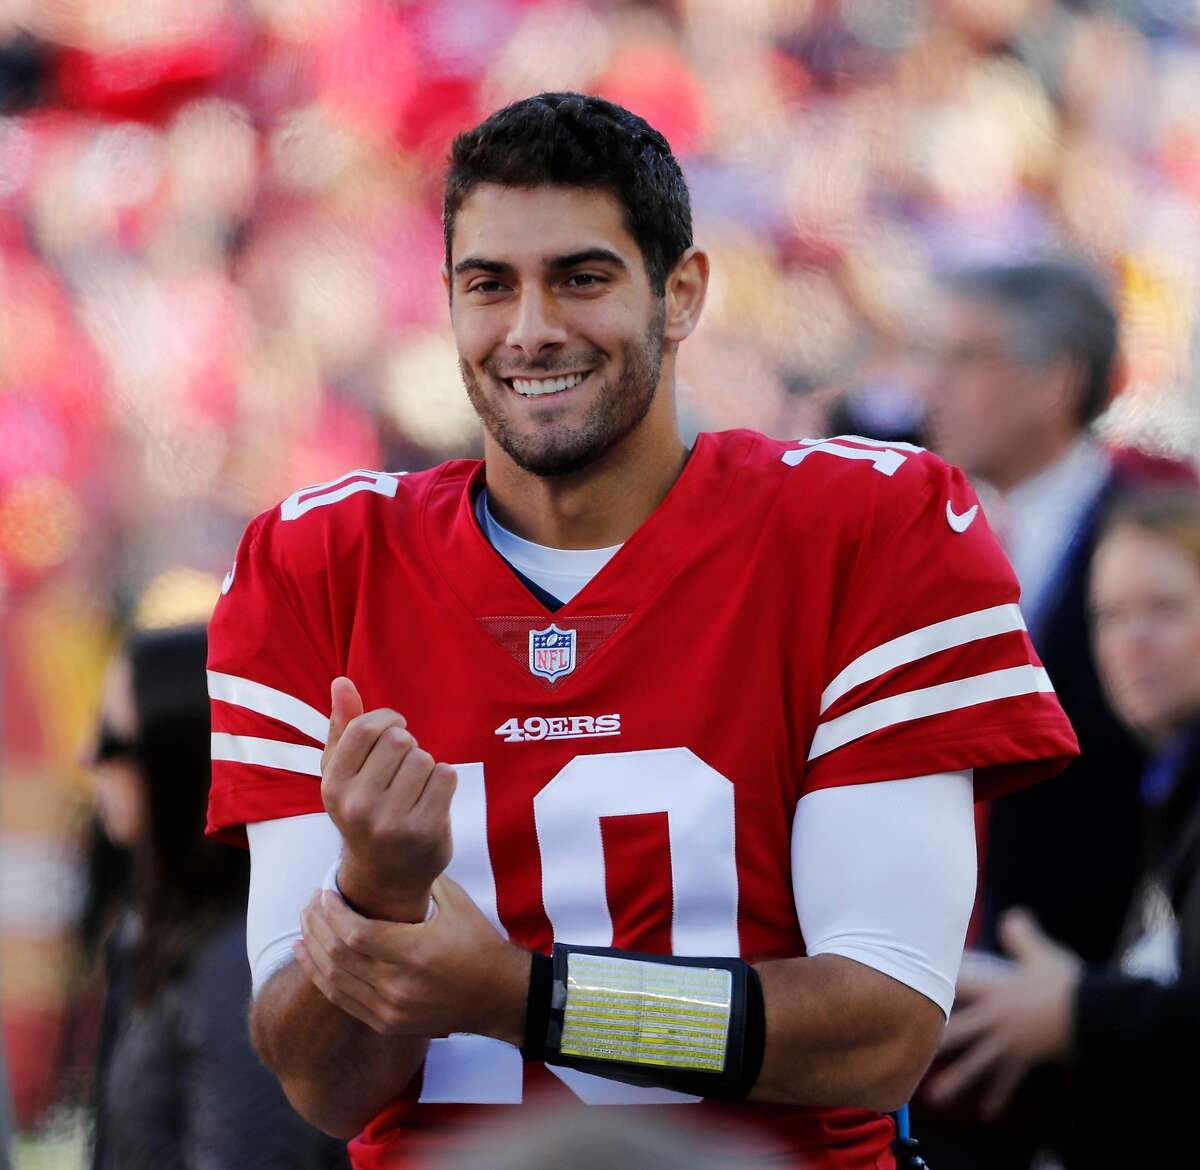 Is Jimmy Garoppolo the 49ers' future? We're about to find out